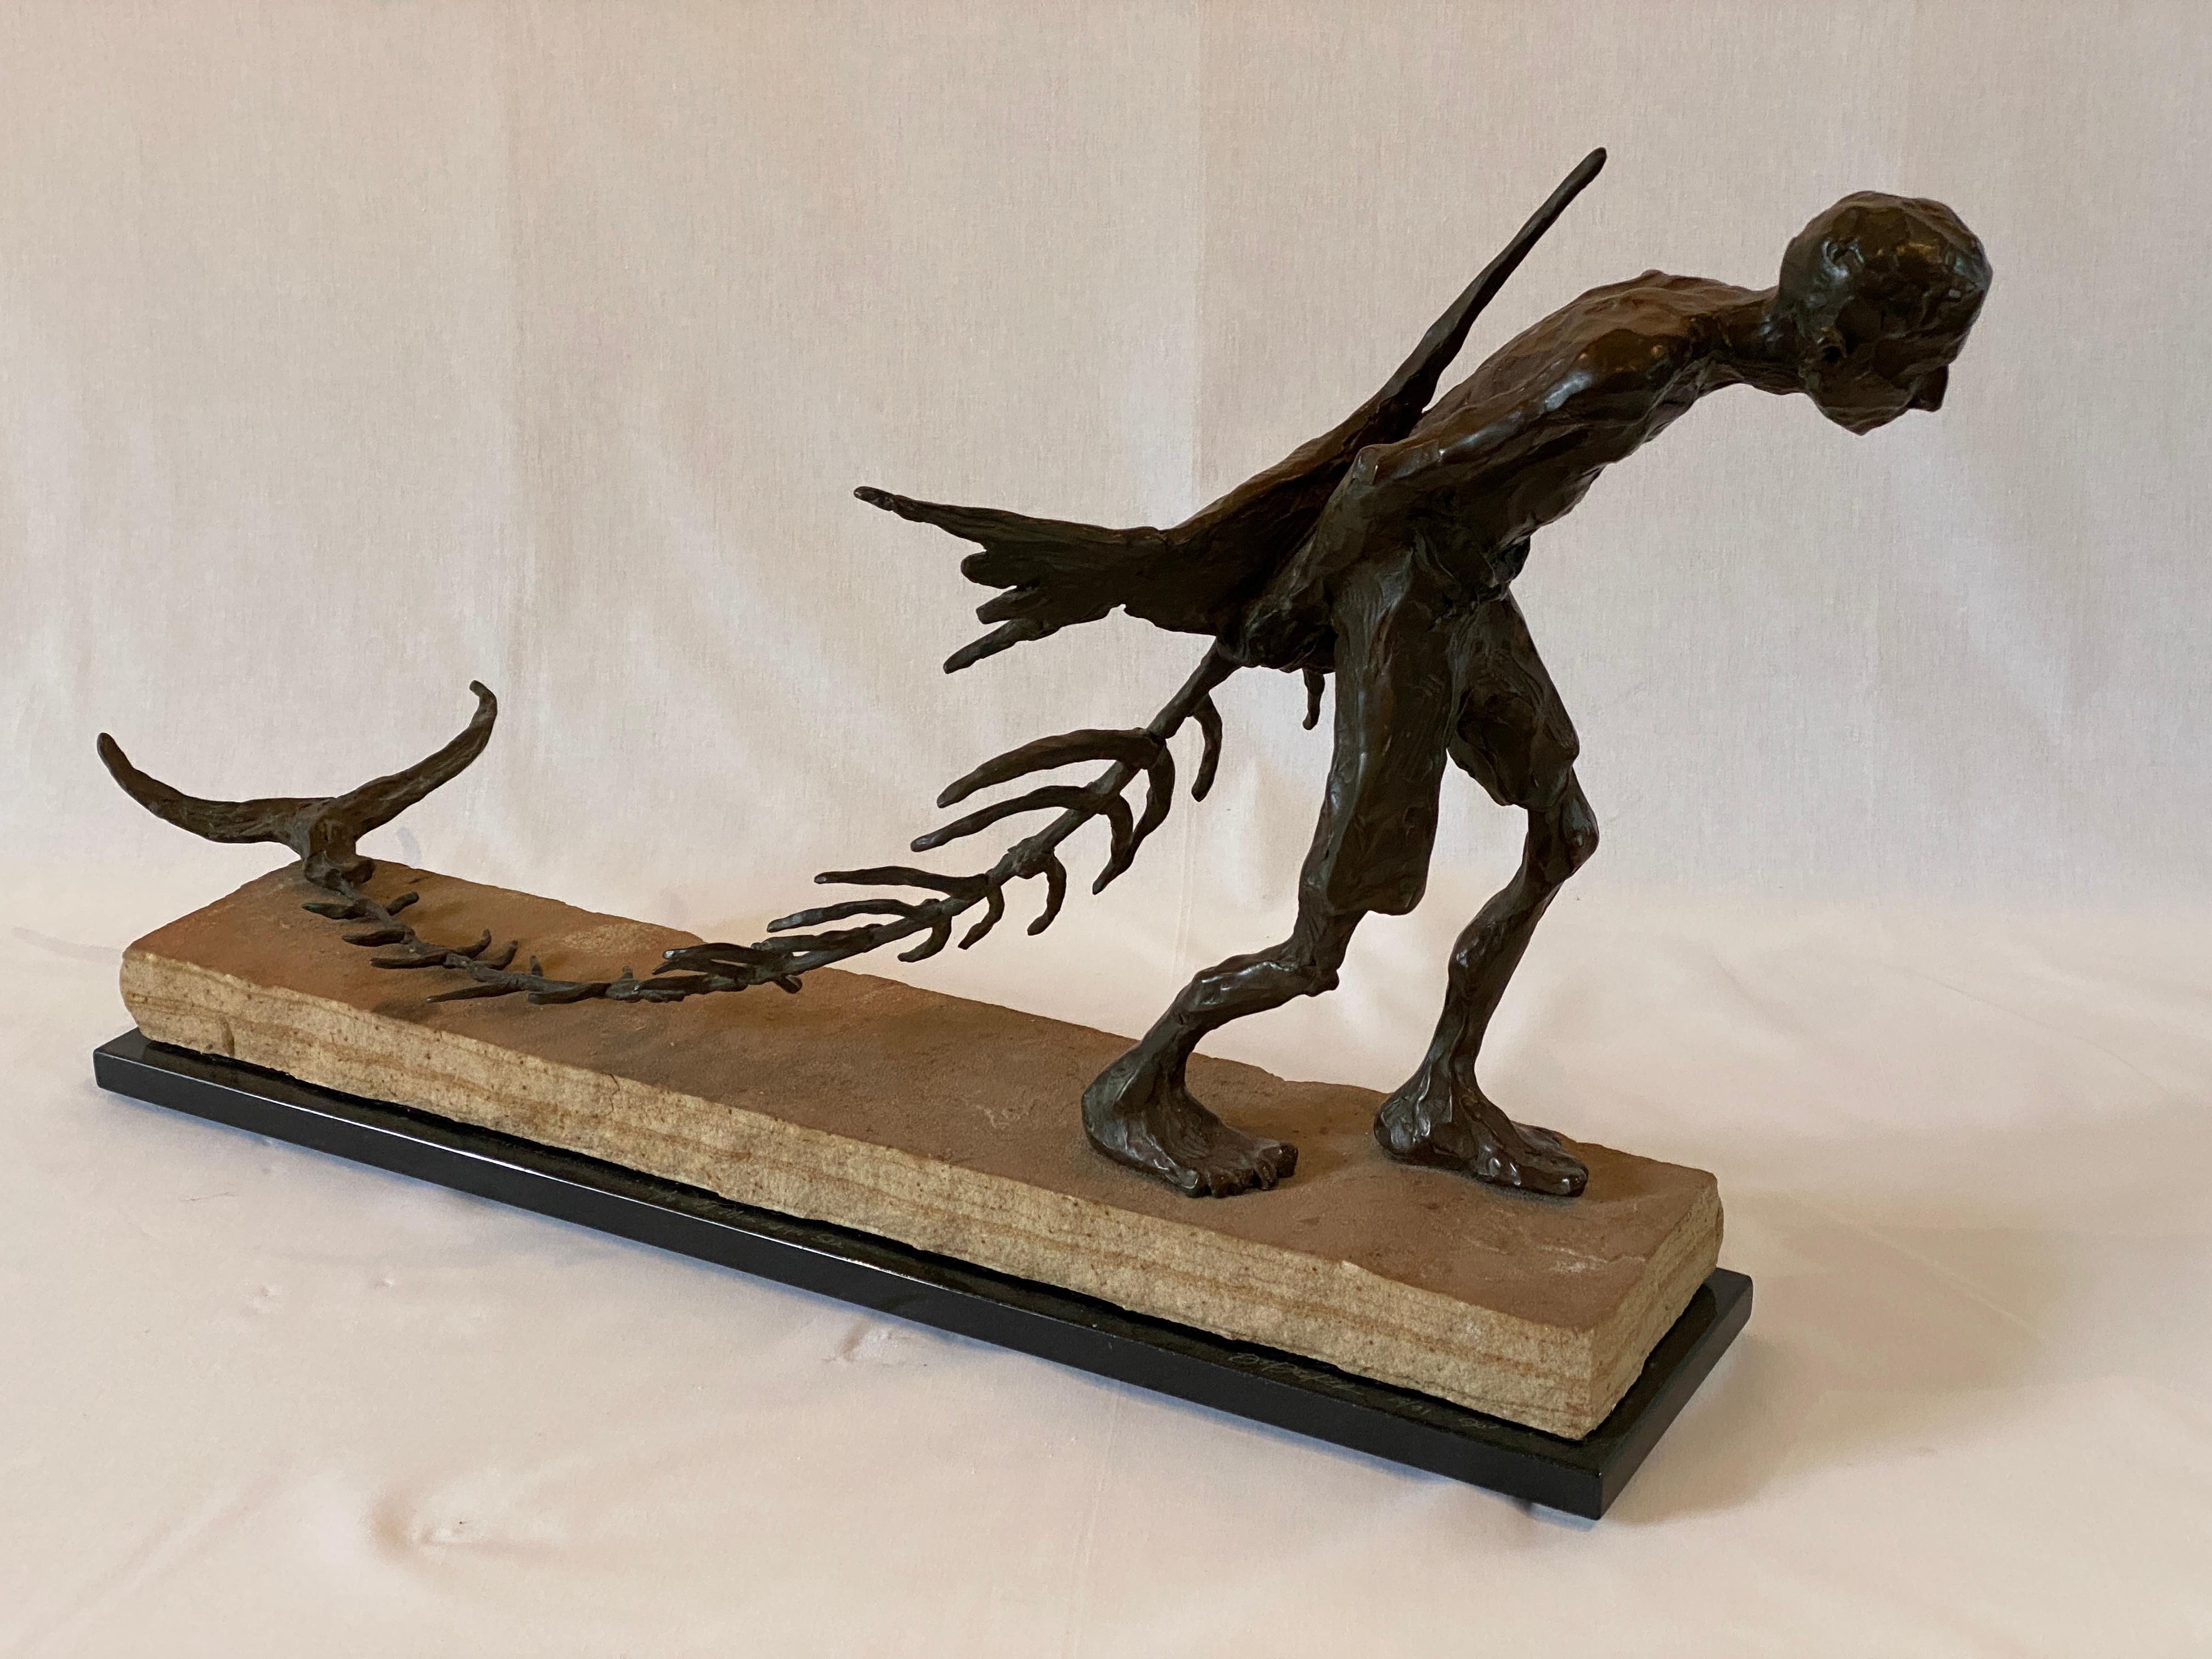 Abstract figurative bronze

Edition of 31, #15 in edition, 1990

After Hemingway's tale, a man walks towing a fish skeleton behind him

From the artist: 
